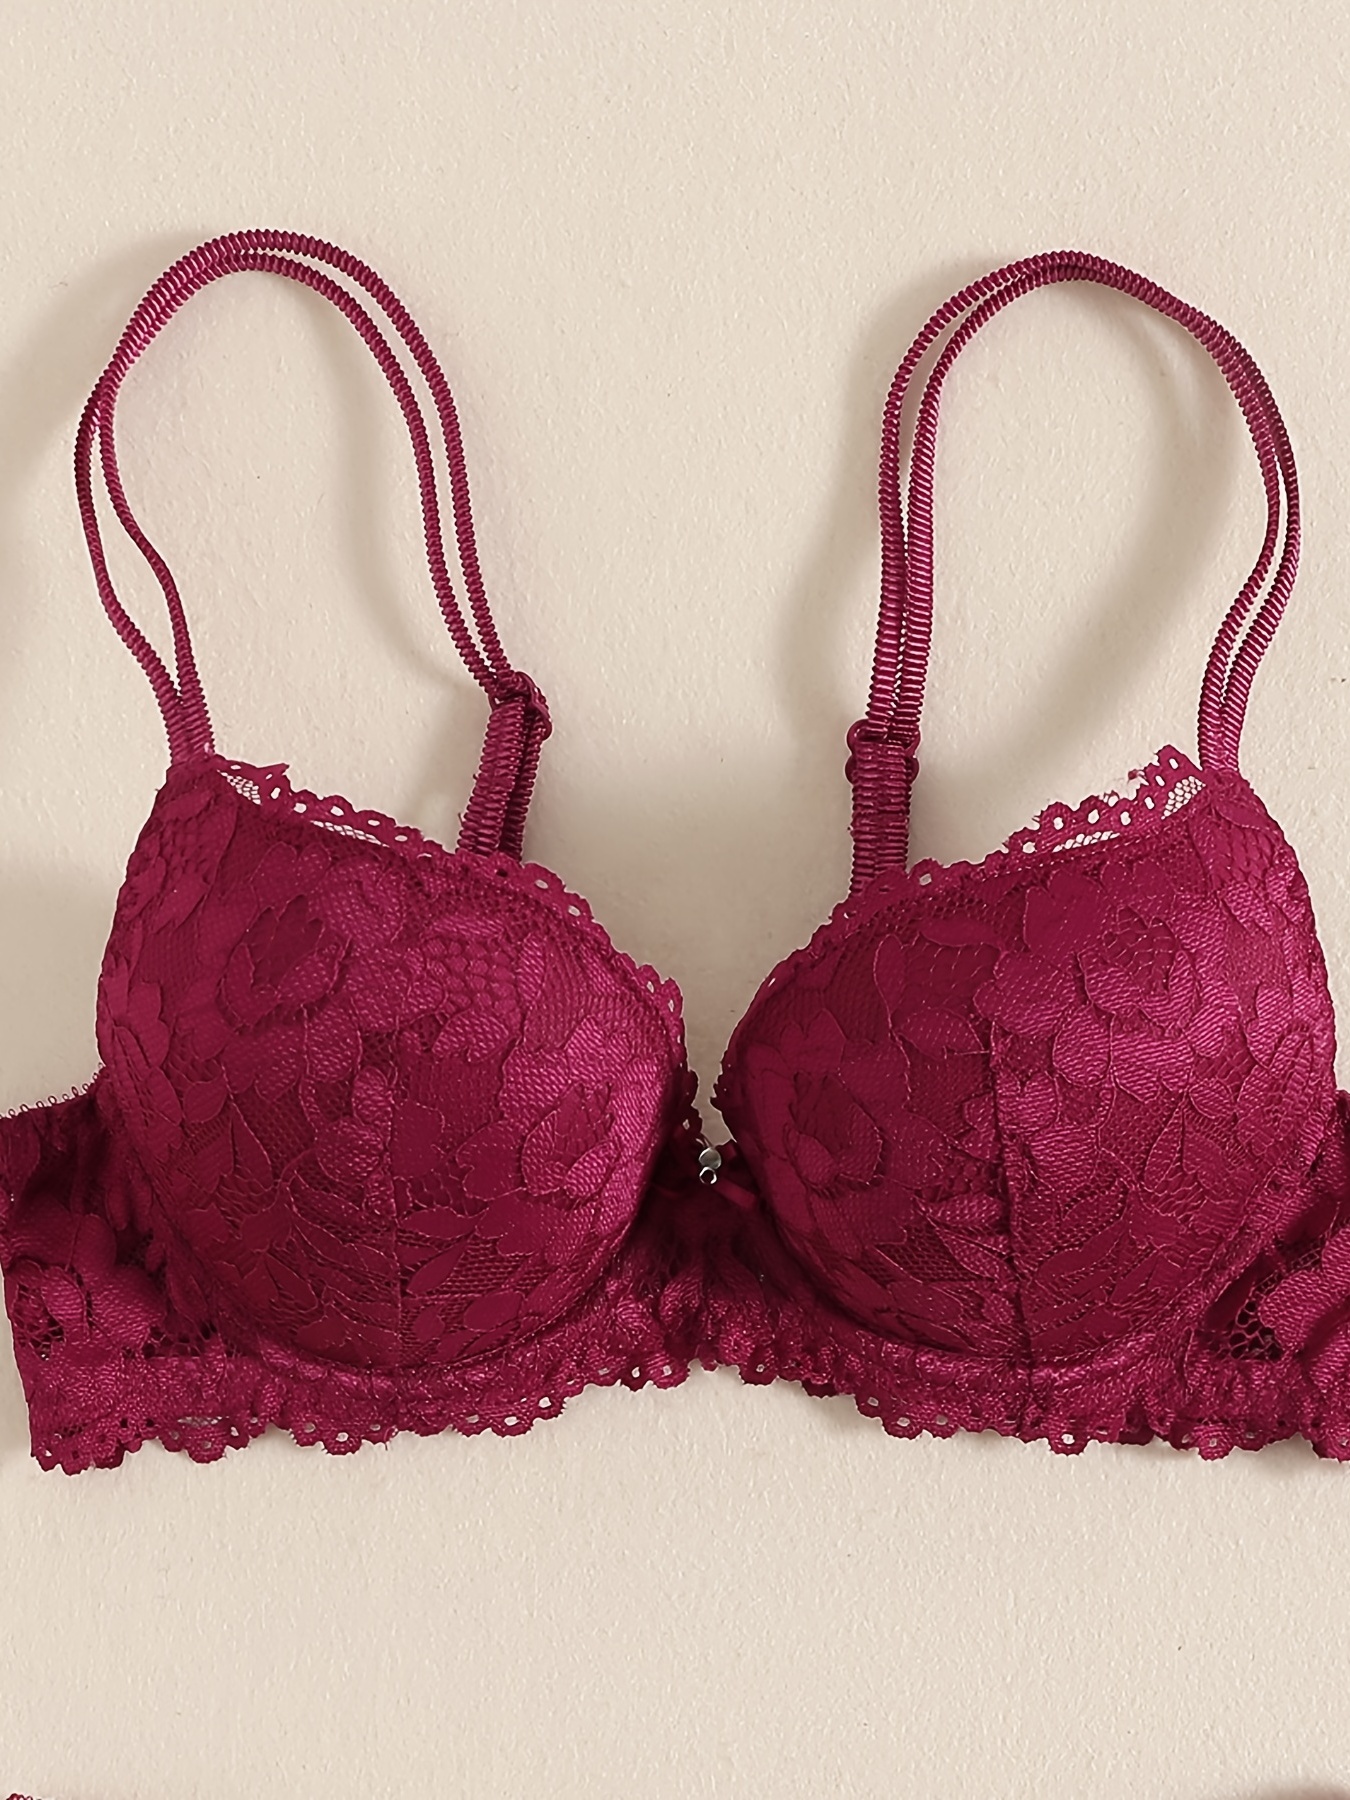 Introducing our newest obsession: the Love Lace collection's padded demi bra.  🌸 Fall head over heels with its romantic lace detailing…